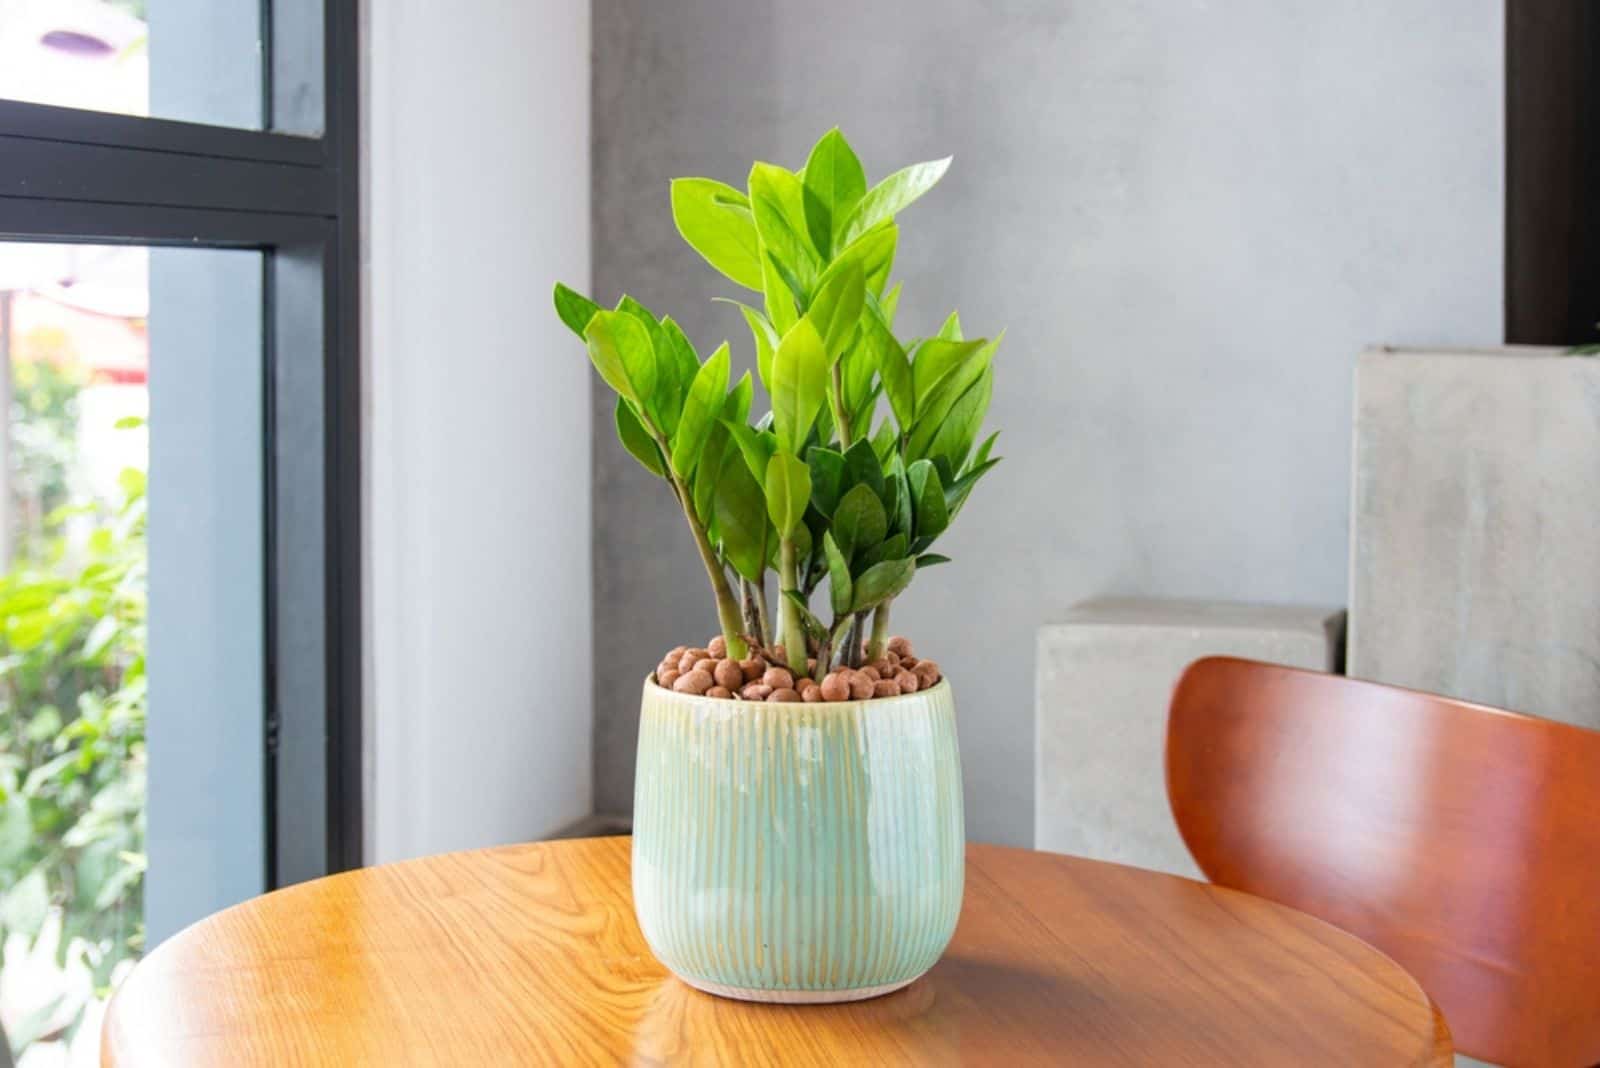 ZZ plant in a white pot on a wooden table